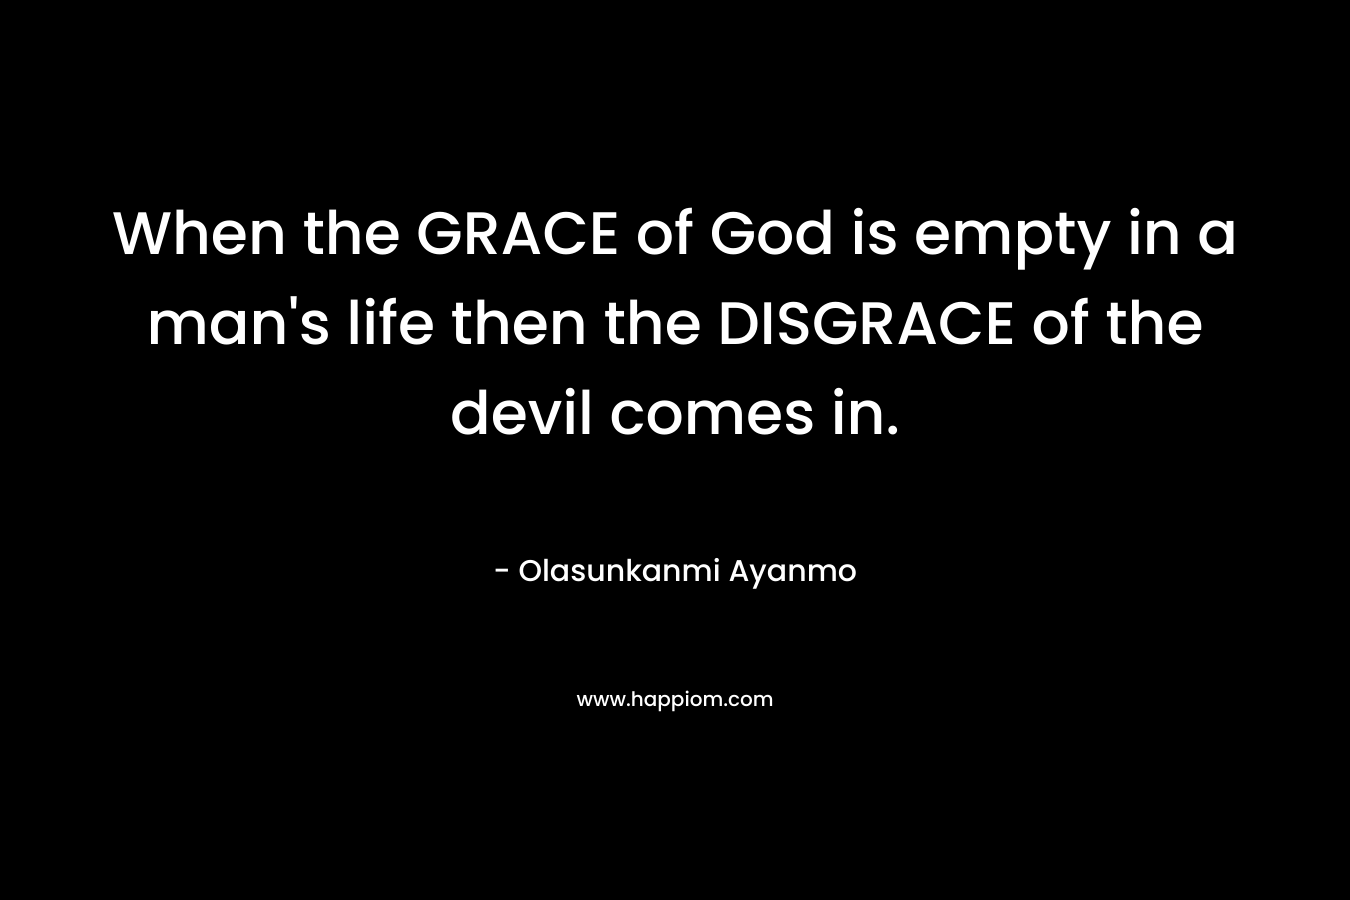 When the GRACE of God is empty in a man’s life then the DISGRACE of the devil comes in. – Olasunkanmi Ayanmo